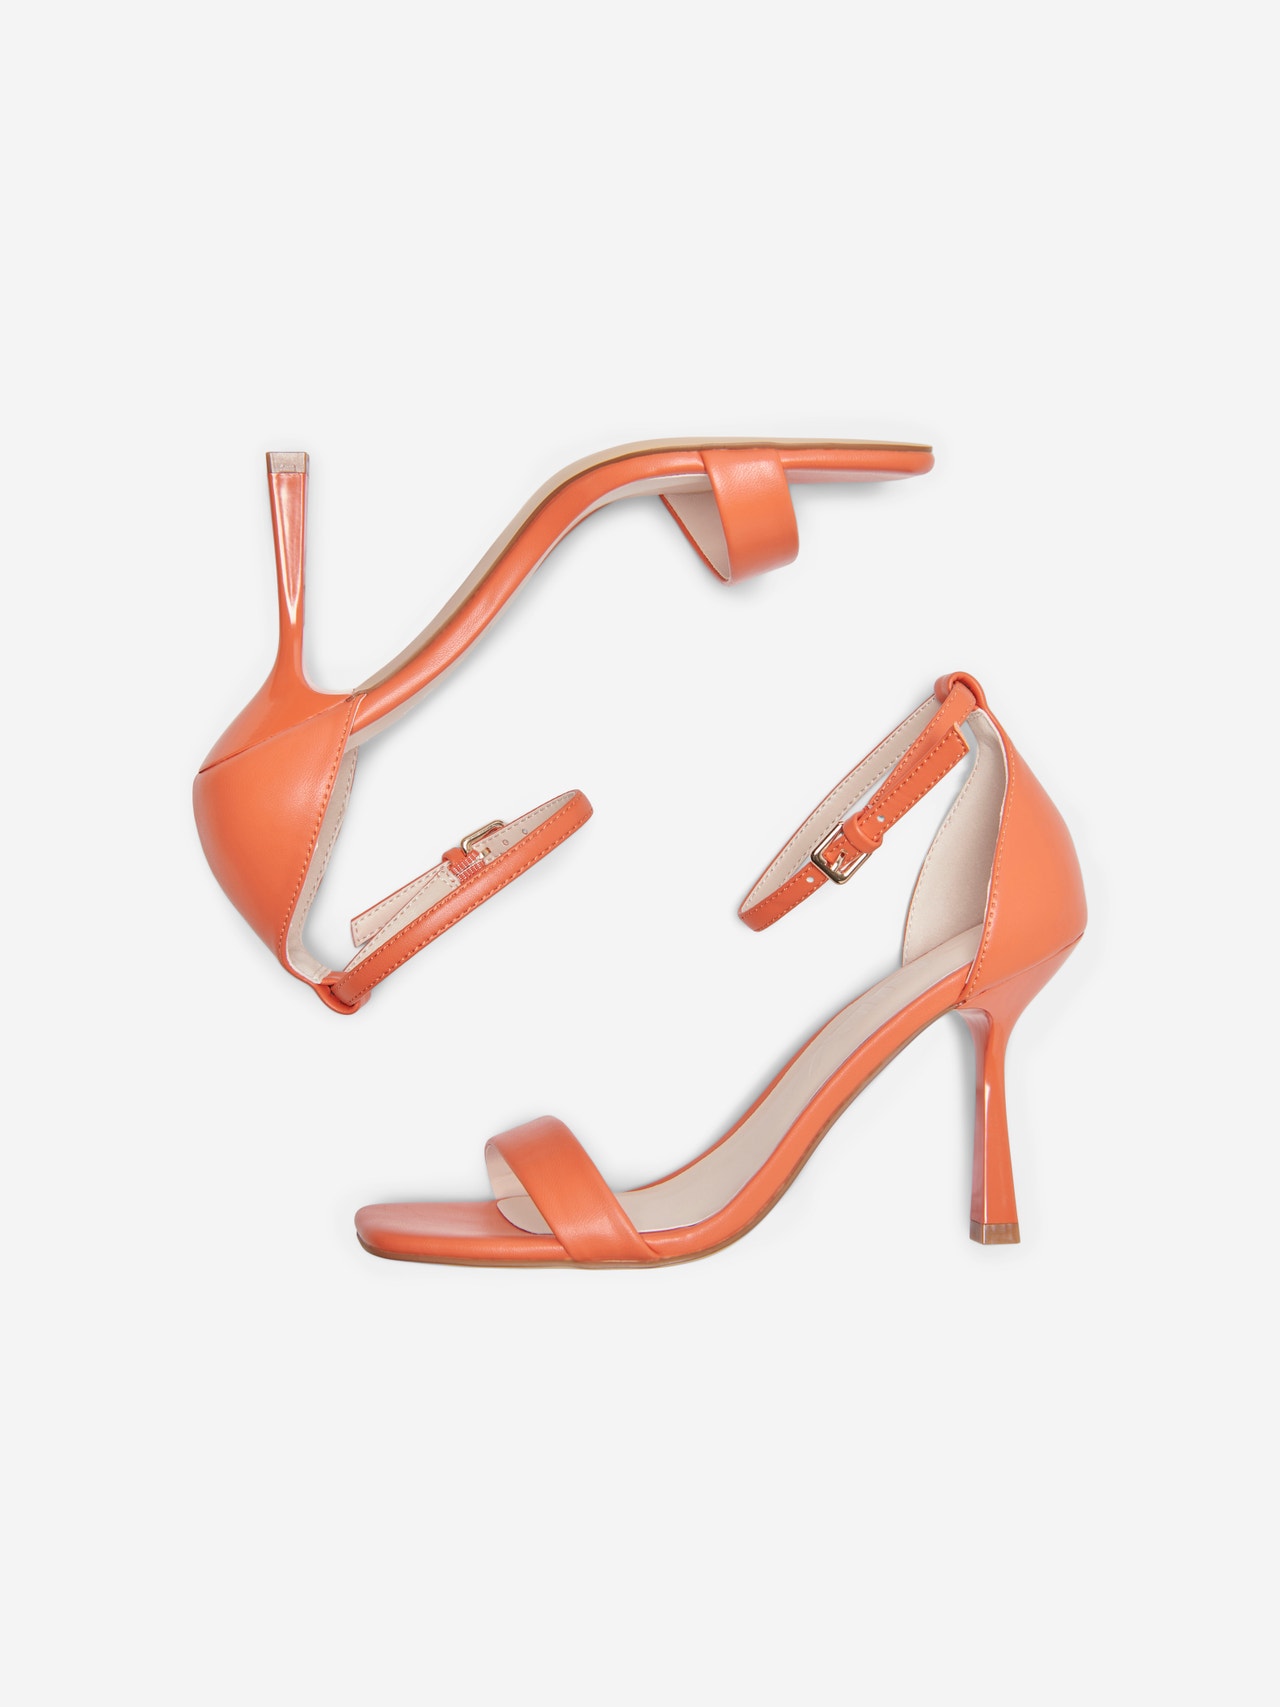 ONLY Heeled sandal with ankle strap -Orange - 15288448